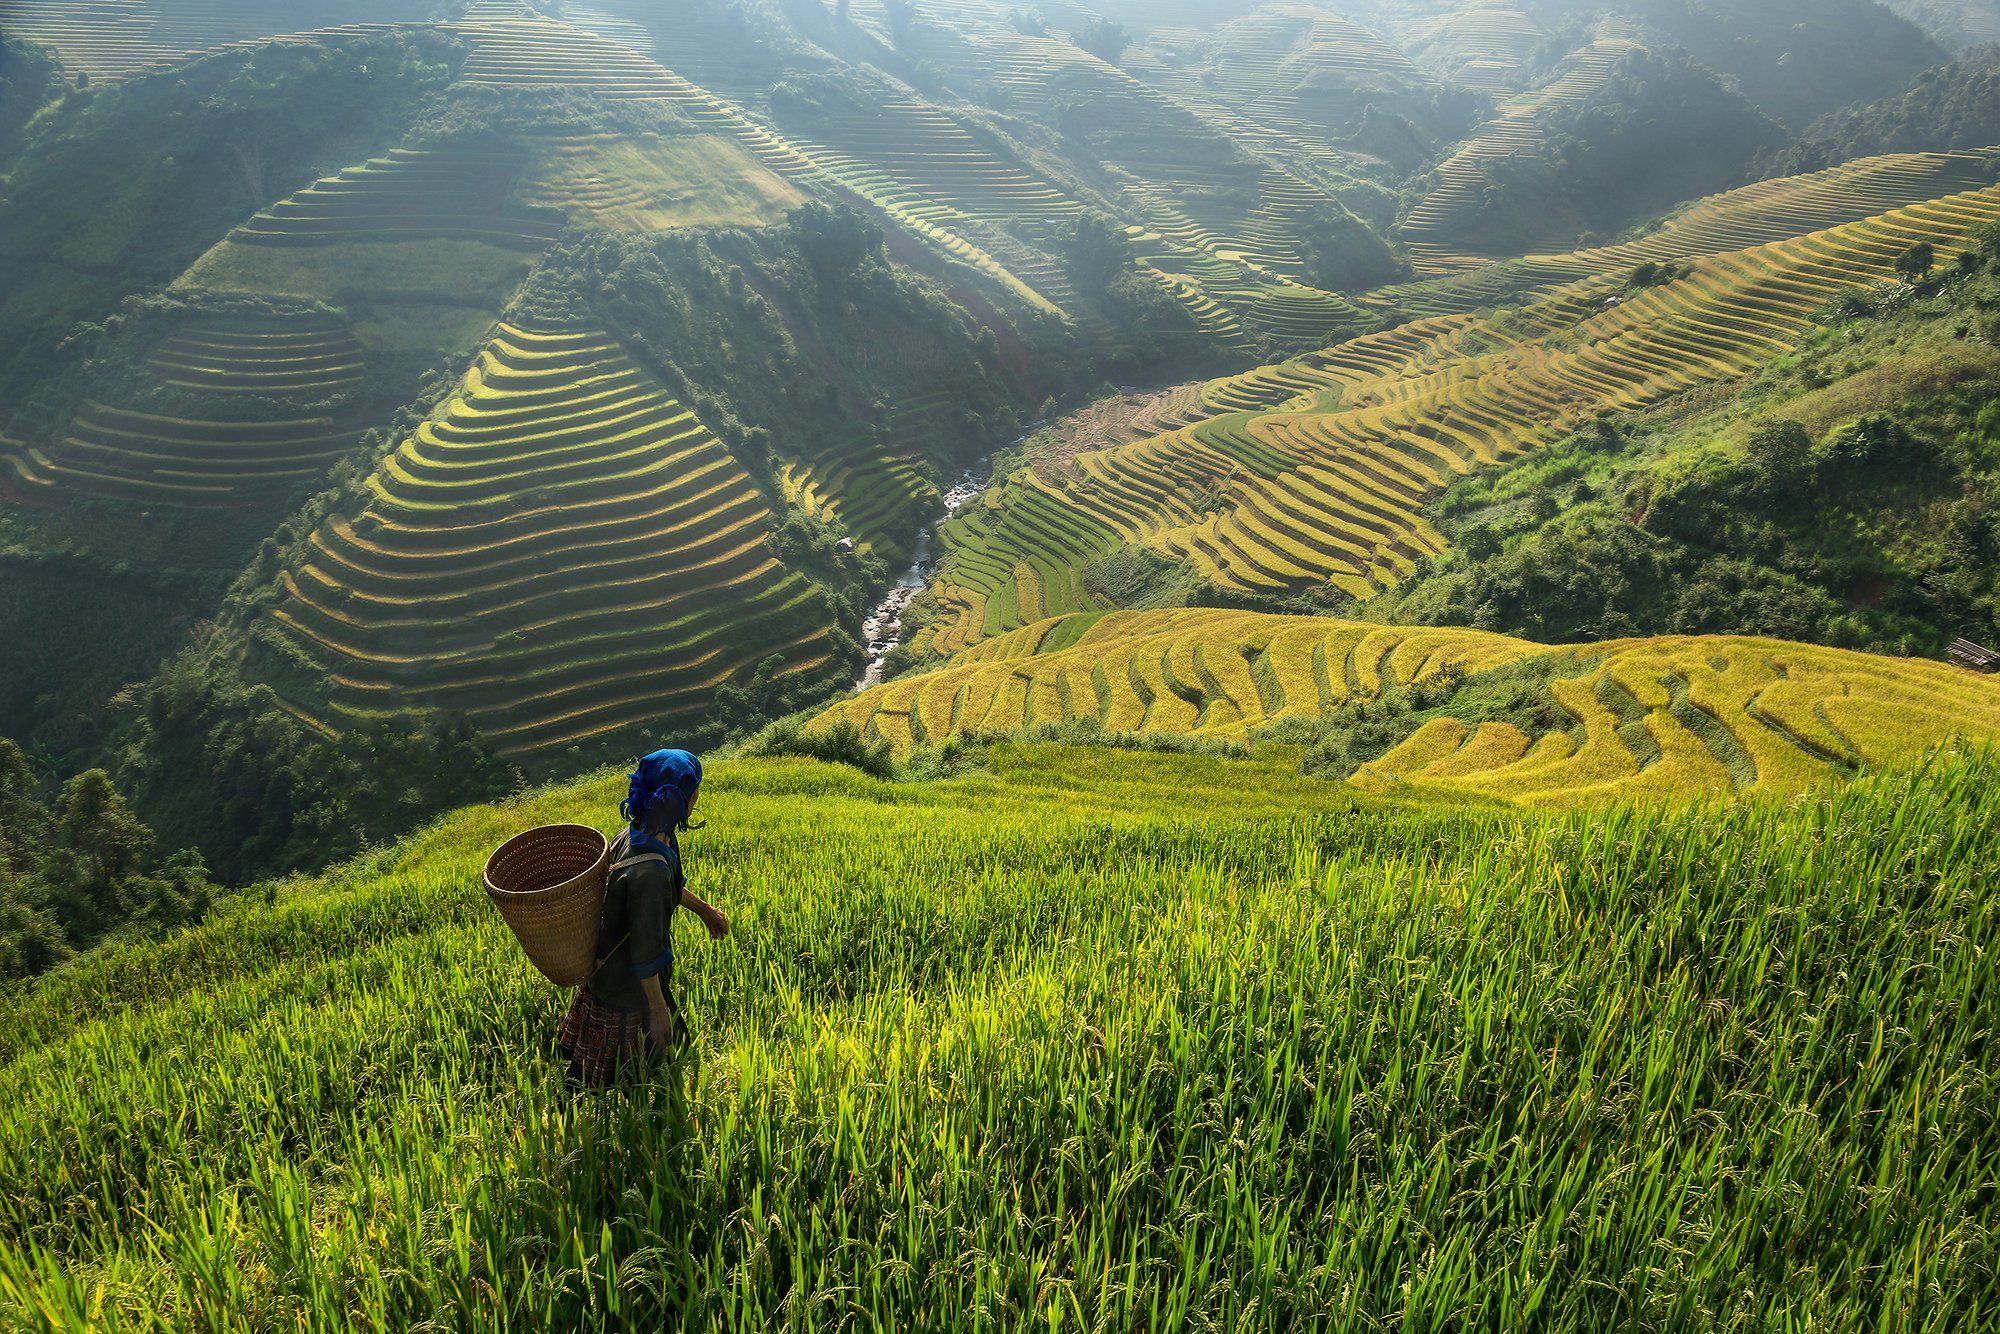 keepwalkin,vietnamh,rice,homeAdult, Adults Only, Agriculture, Color Image, Day, Distant, Grass, Horizontal, Nature, North Vietnam, One Person, Outdoors, People, Photography, Rice Paddy, Terraced Field, Vietnam, Walking, sarawut intarob